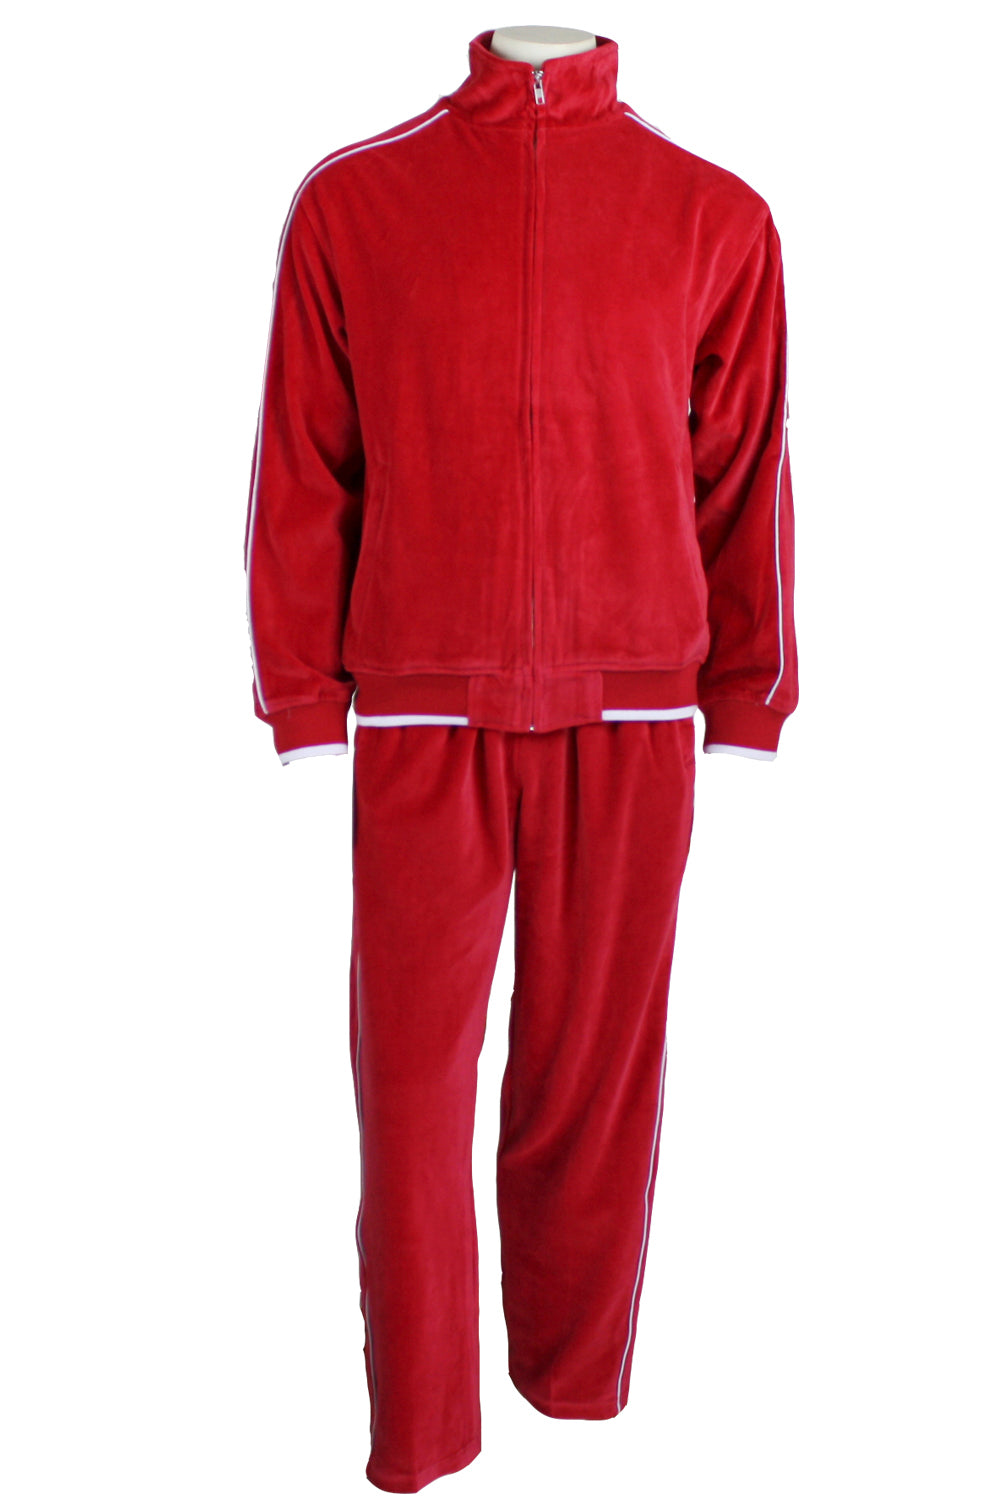 Michelangelo tag Ekspression Mens Red Velour Tracksuit with White Piping – Sweatsedo